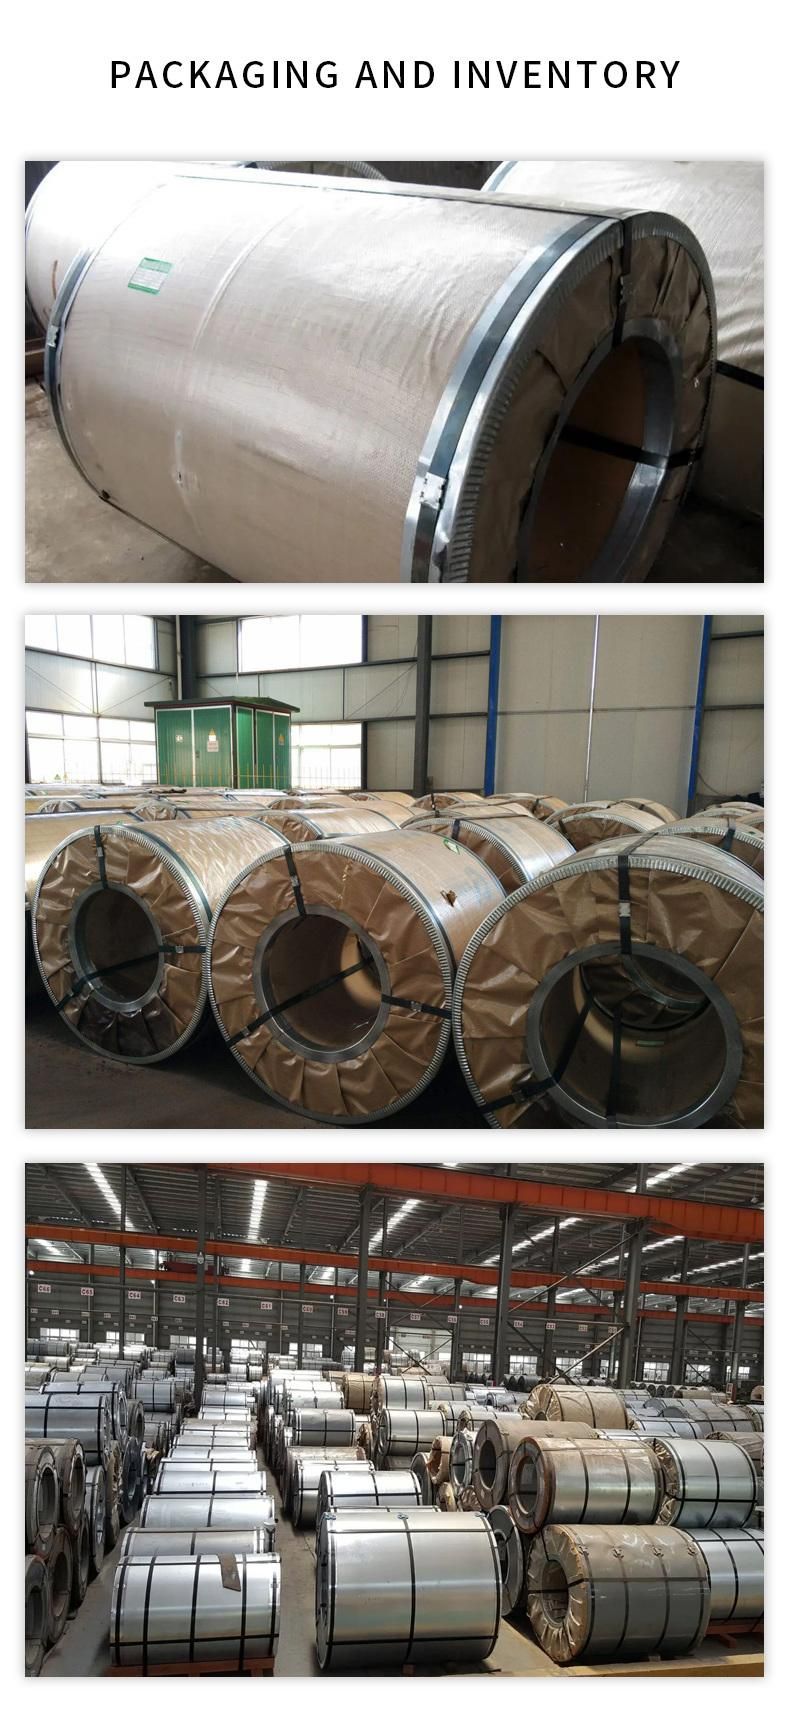 SAE 1005 1008 1018 1095 Carbon Steel Coil High Strength Building Steel SAE J403 SAE1026 SAE1035 SAE1050 Cold Rolled Coil Mechanical Structural Steel JIS G4501